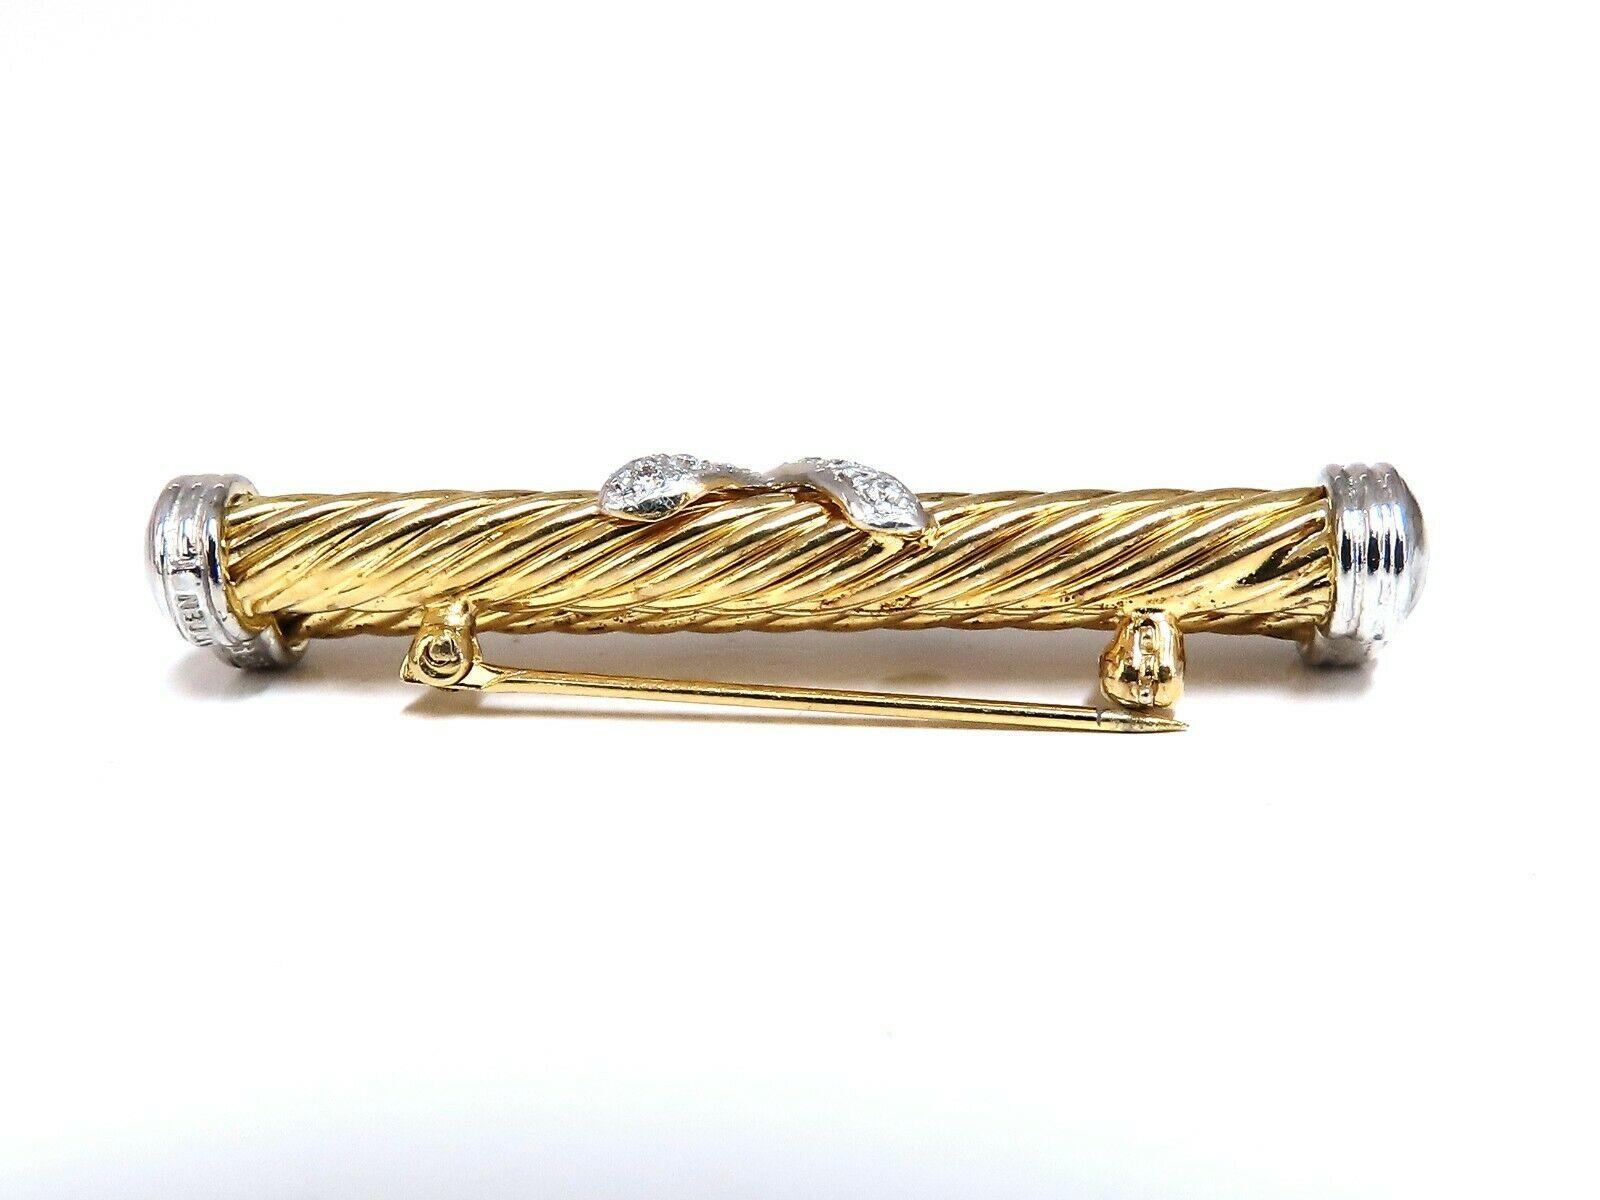 Retro Gold X Twist pin.

Double Tubular Candy Caned Twisting pattern

New condition.

Natural Round Diamonds: .35ct

Full Cut, H-color Vs-2 clarity.

Measures: 2 X .47 inch

Depth: .28 inch

14kt. yellow gold & Silver Caps

8.9 grams